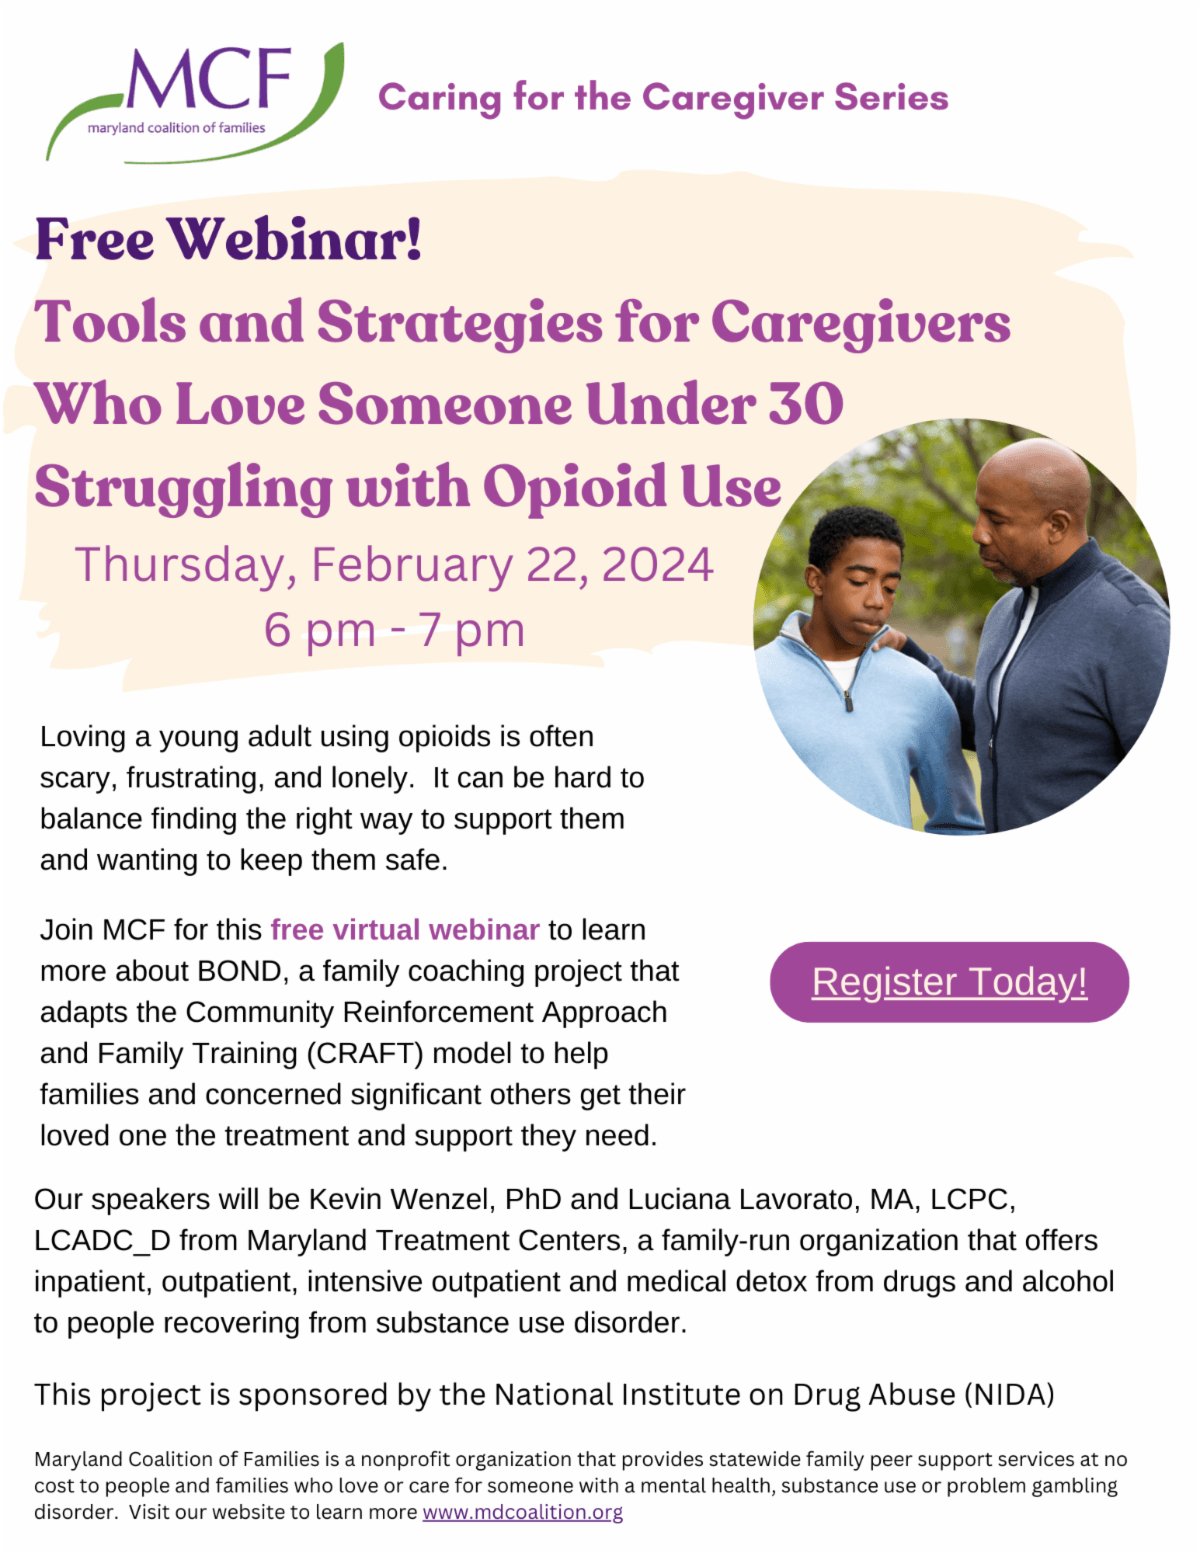 flyer with text explaining caregiver series 